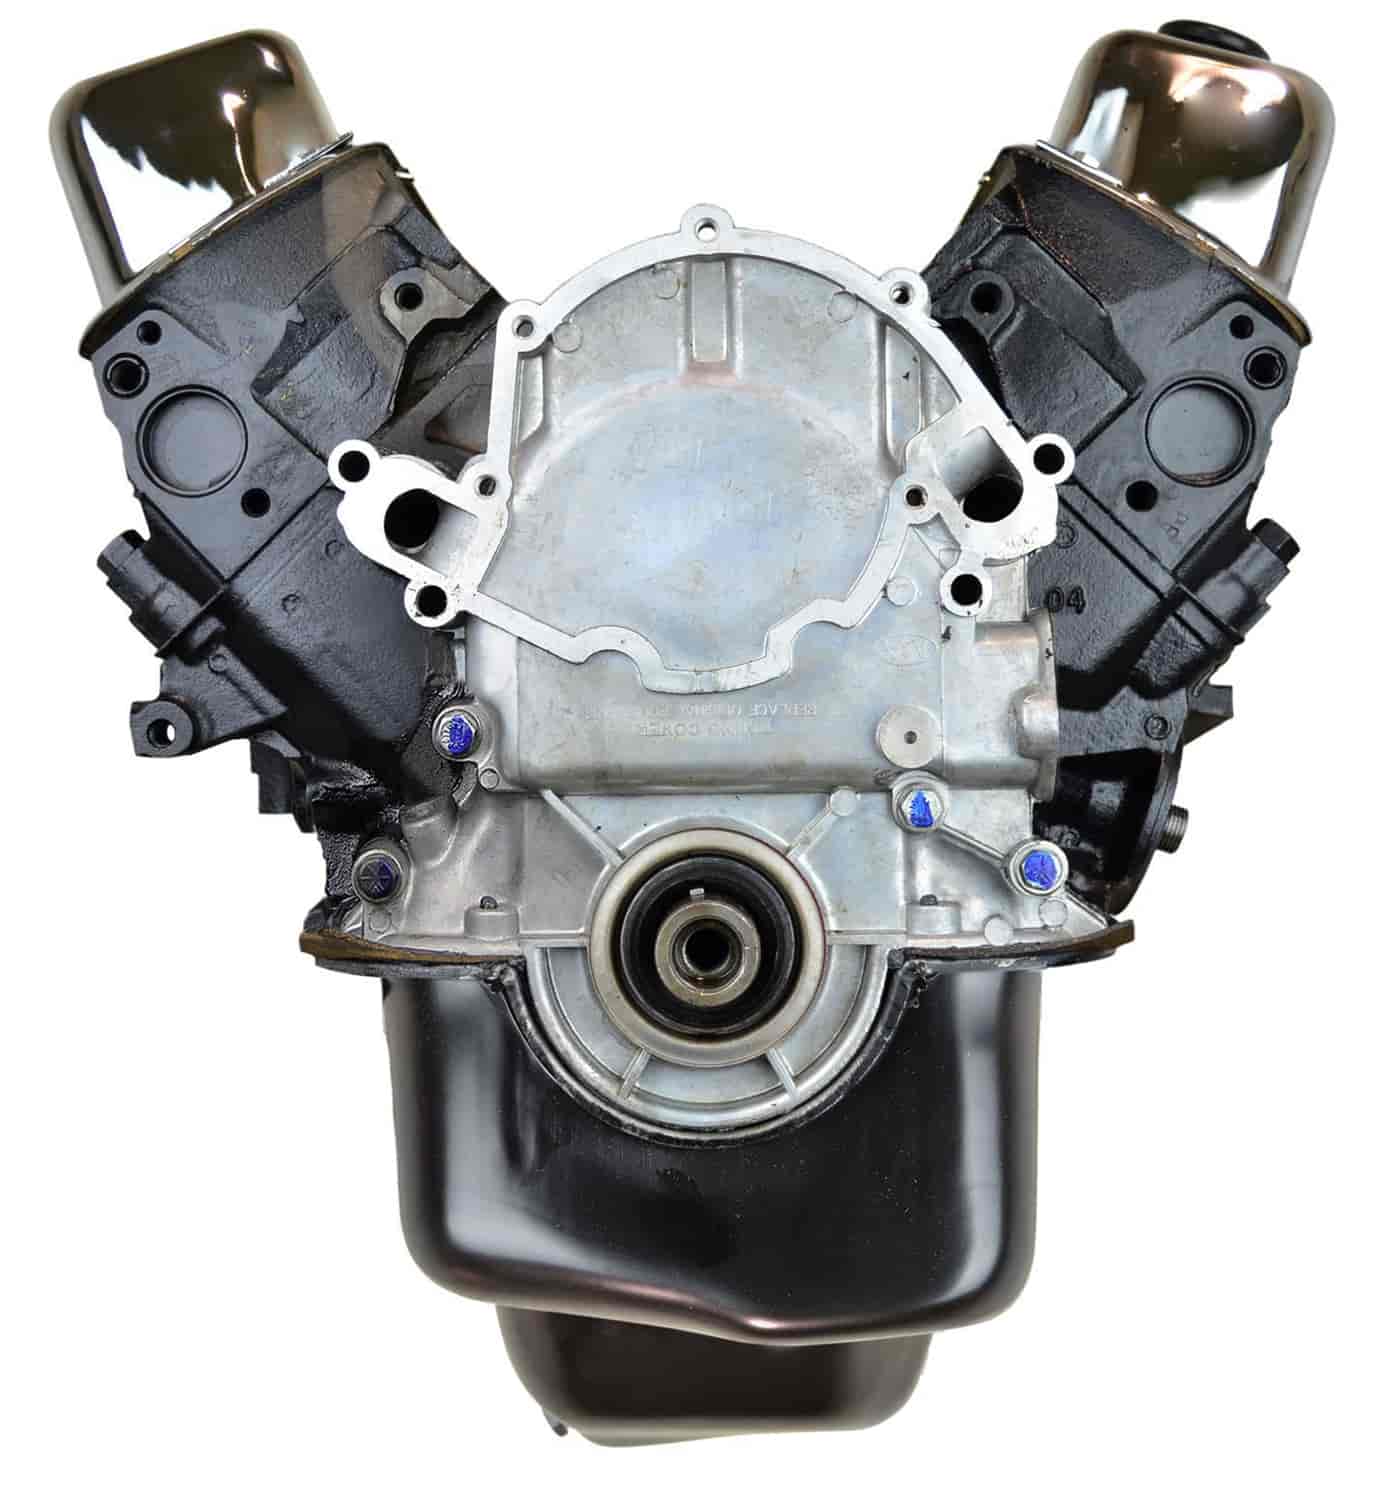 Remanufactured Crate Engine for 1977-1980 Ford Car & F-Series Truck with 302ci/5.0L V8